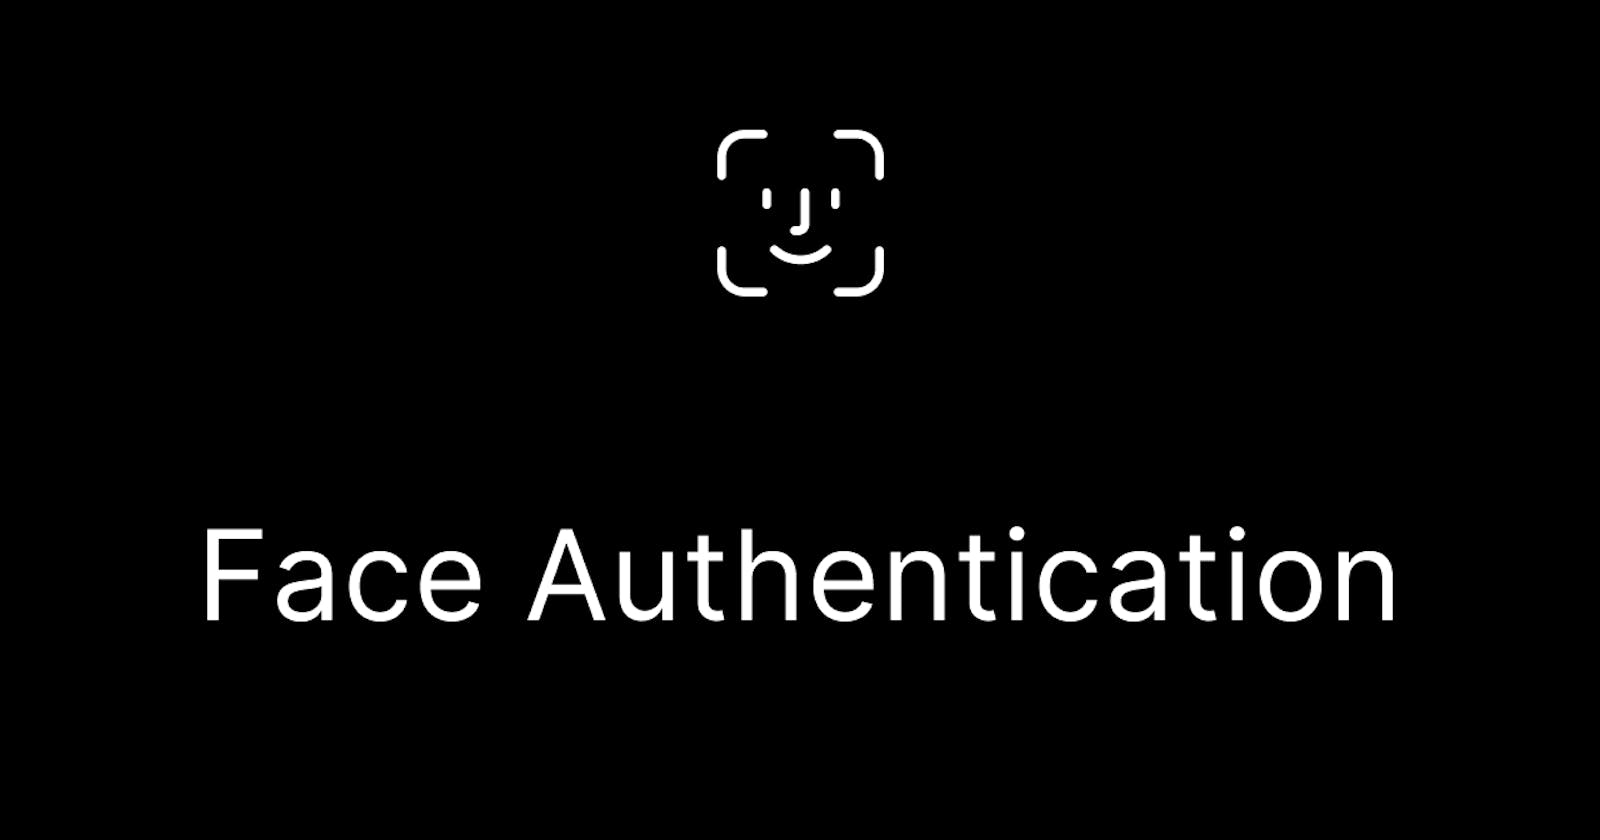 Authentication is hard. Let FACEIO handle it for you